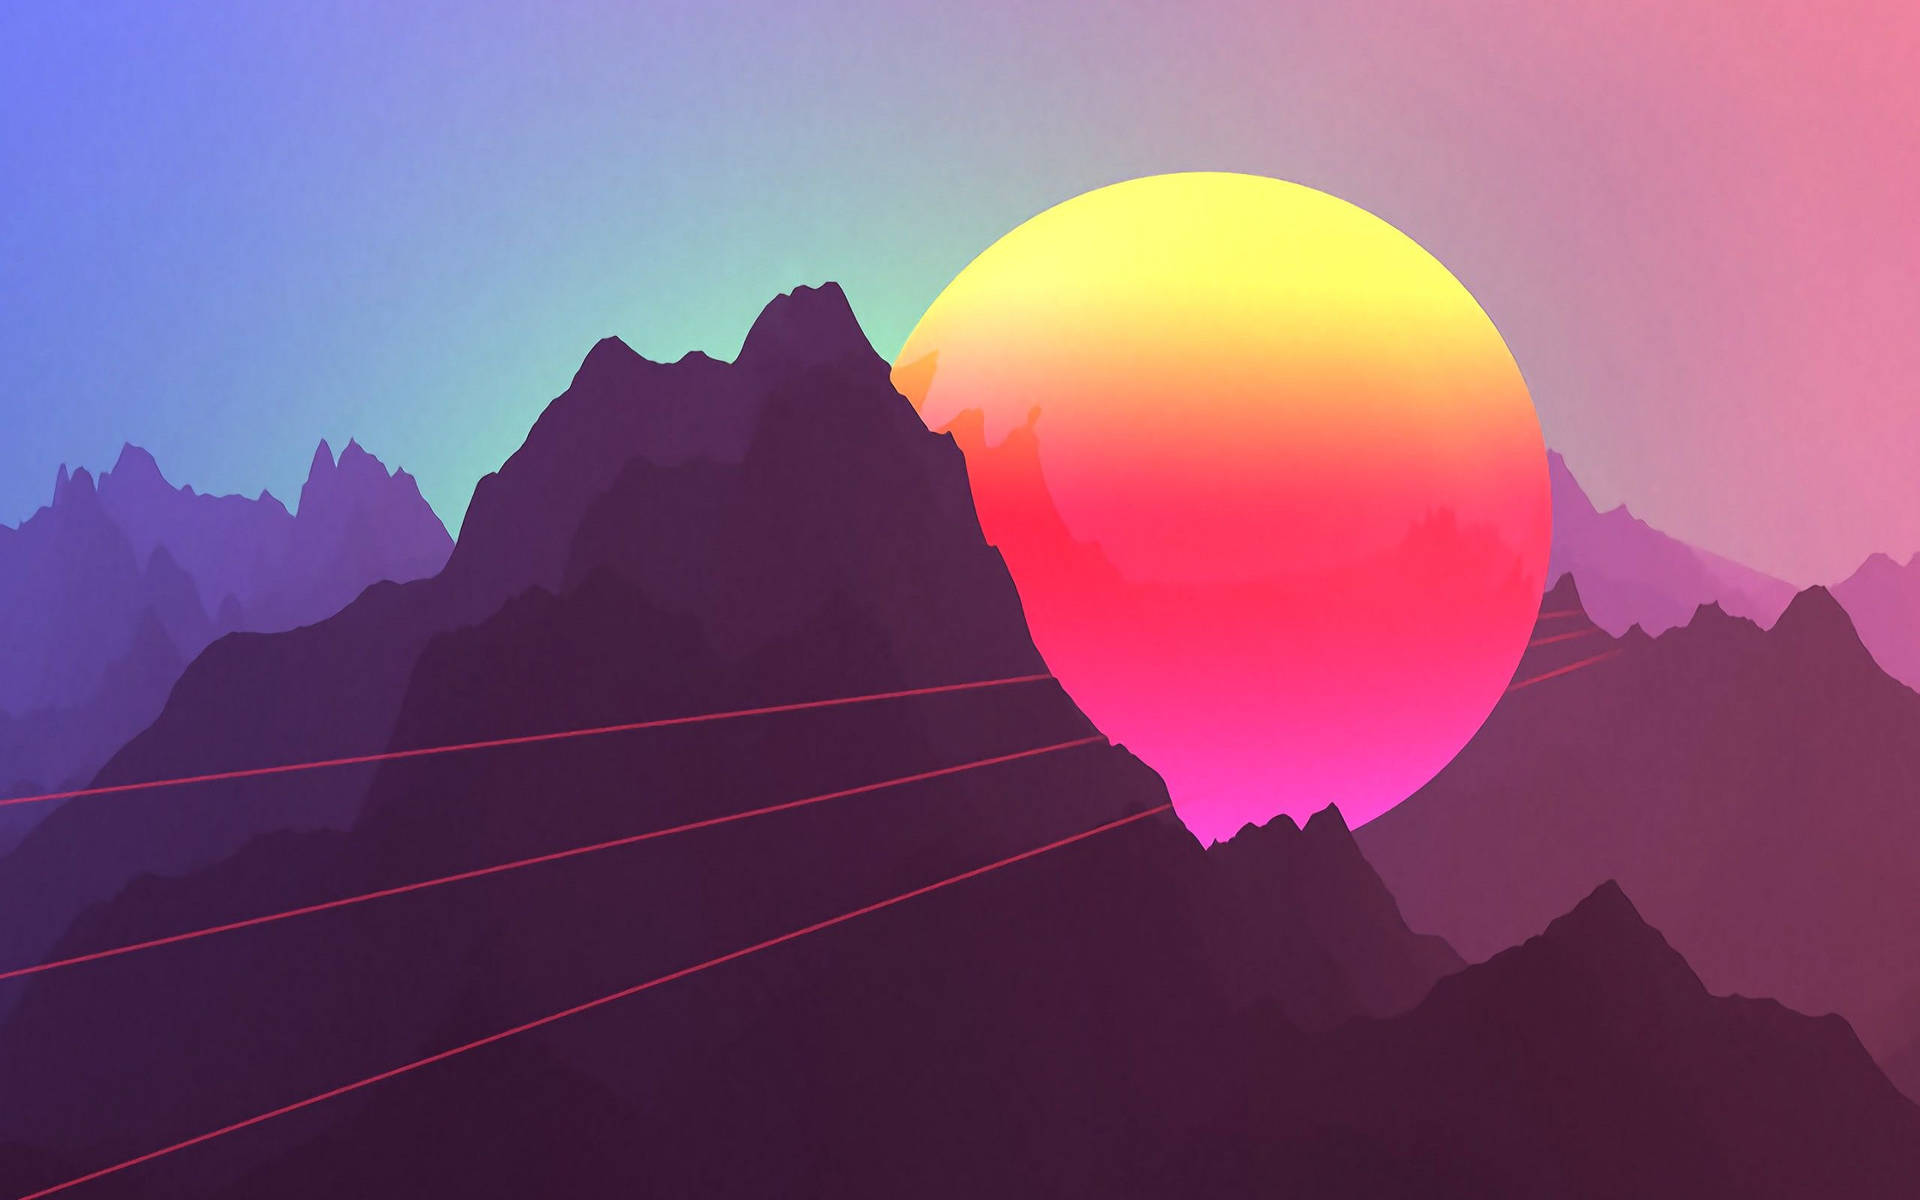 “Unwind in the sunset with your Macbook” Wallpaper